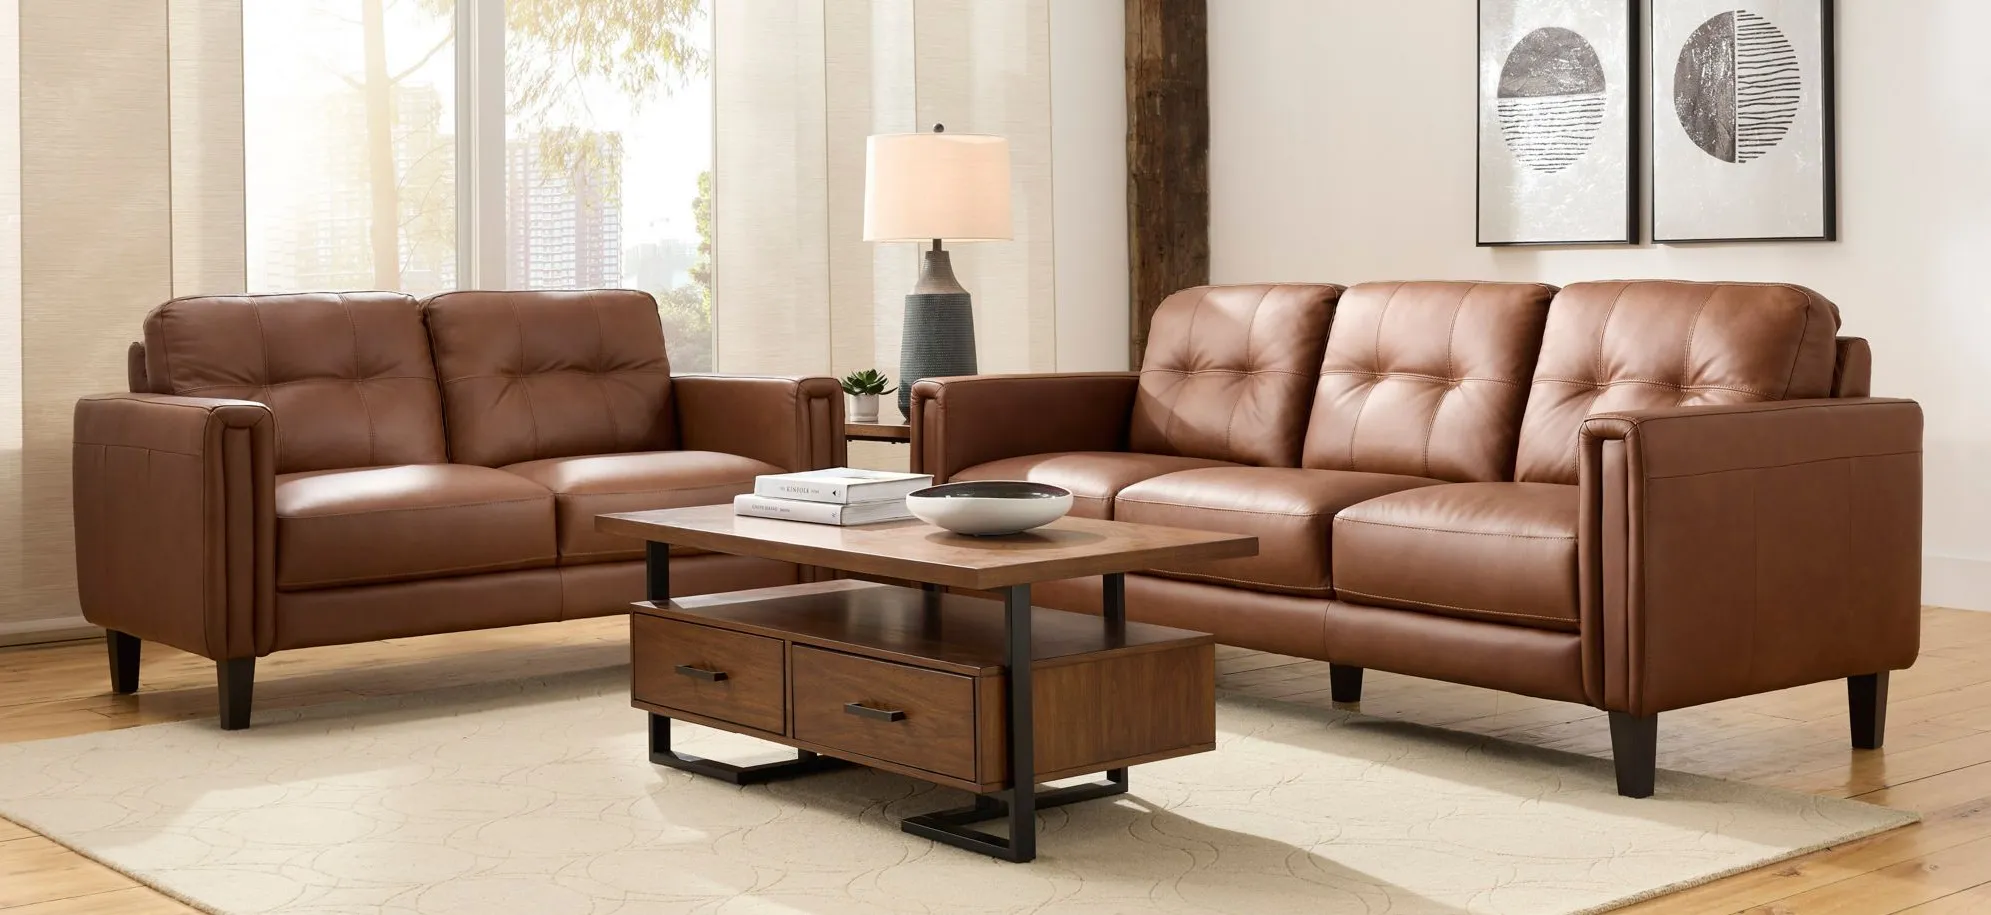 Salerno Living Room Set in Brown by Chateau D'Ax